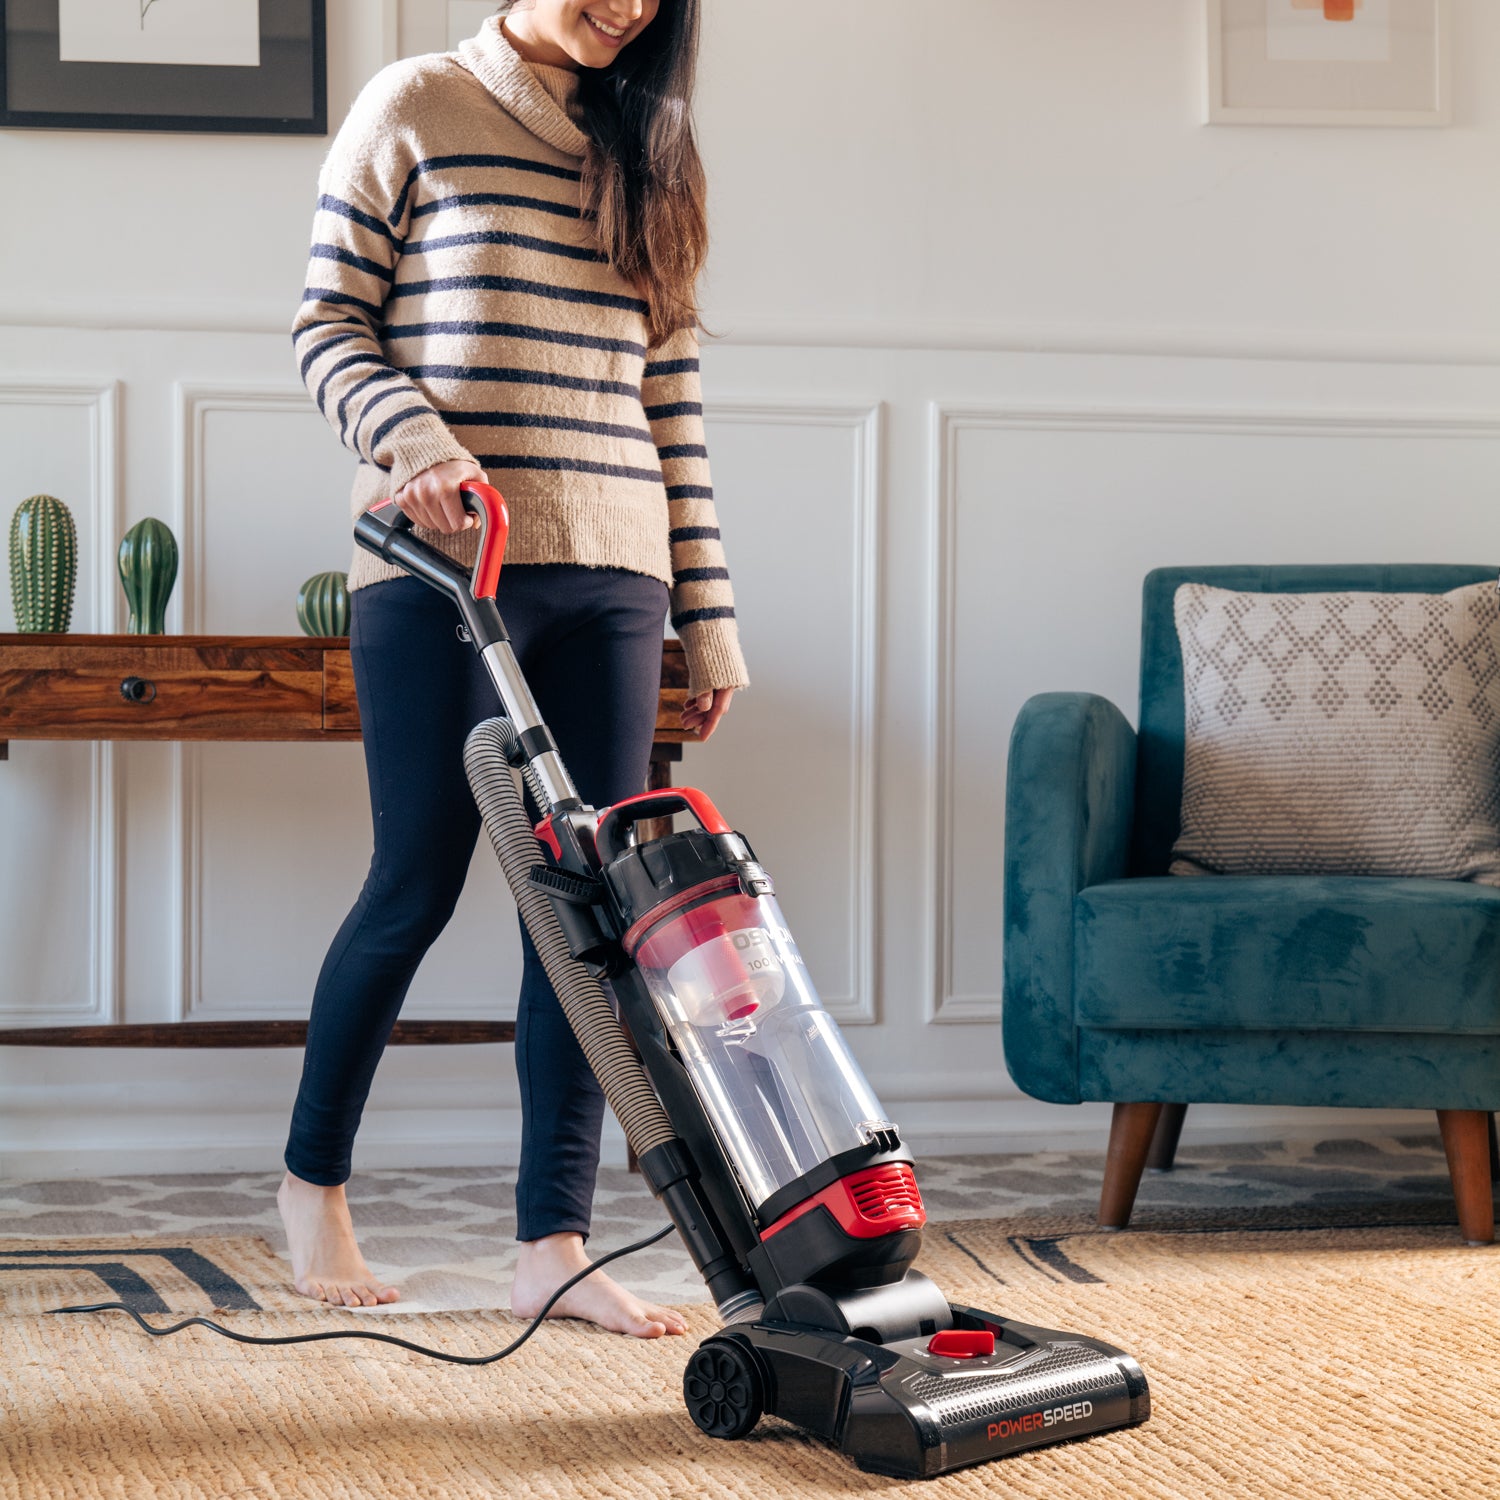 A sleek Red and black vacuum cleaner, the OS 26UBL, Showcasing women standing against a backdrop of a clean and tidy living room using our Powerspeed Upright Vacuum